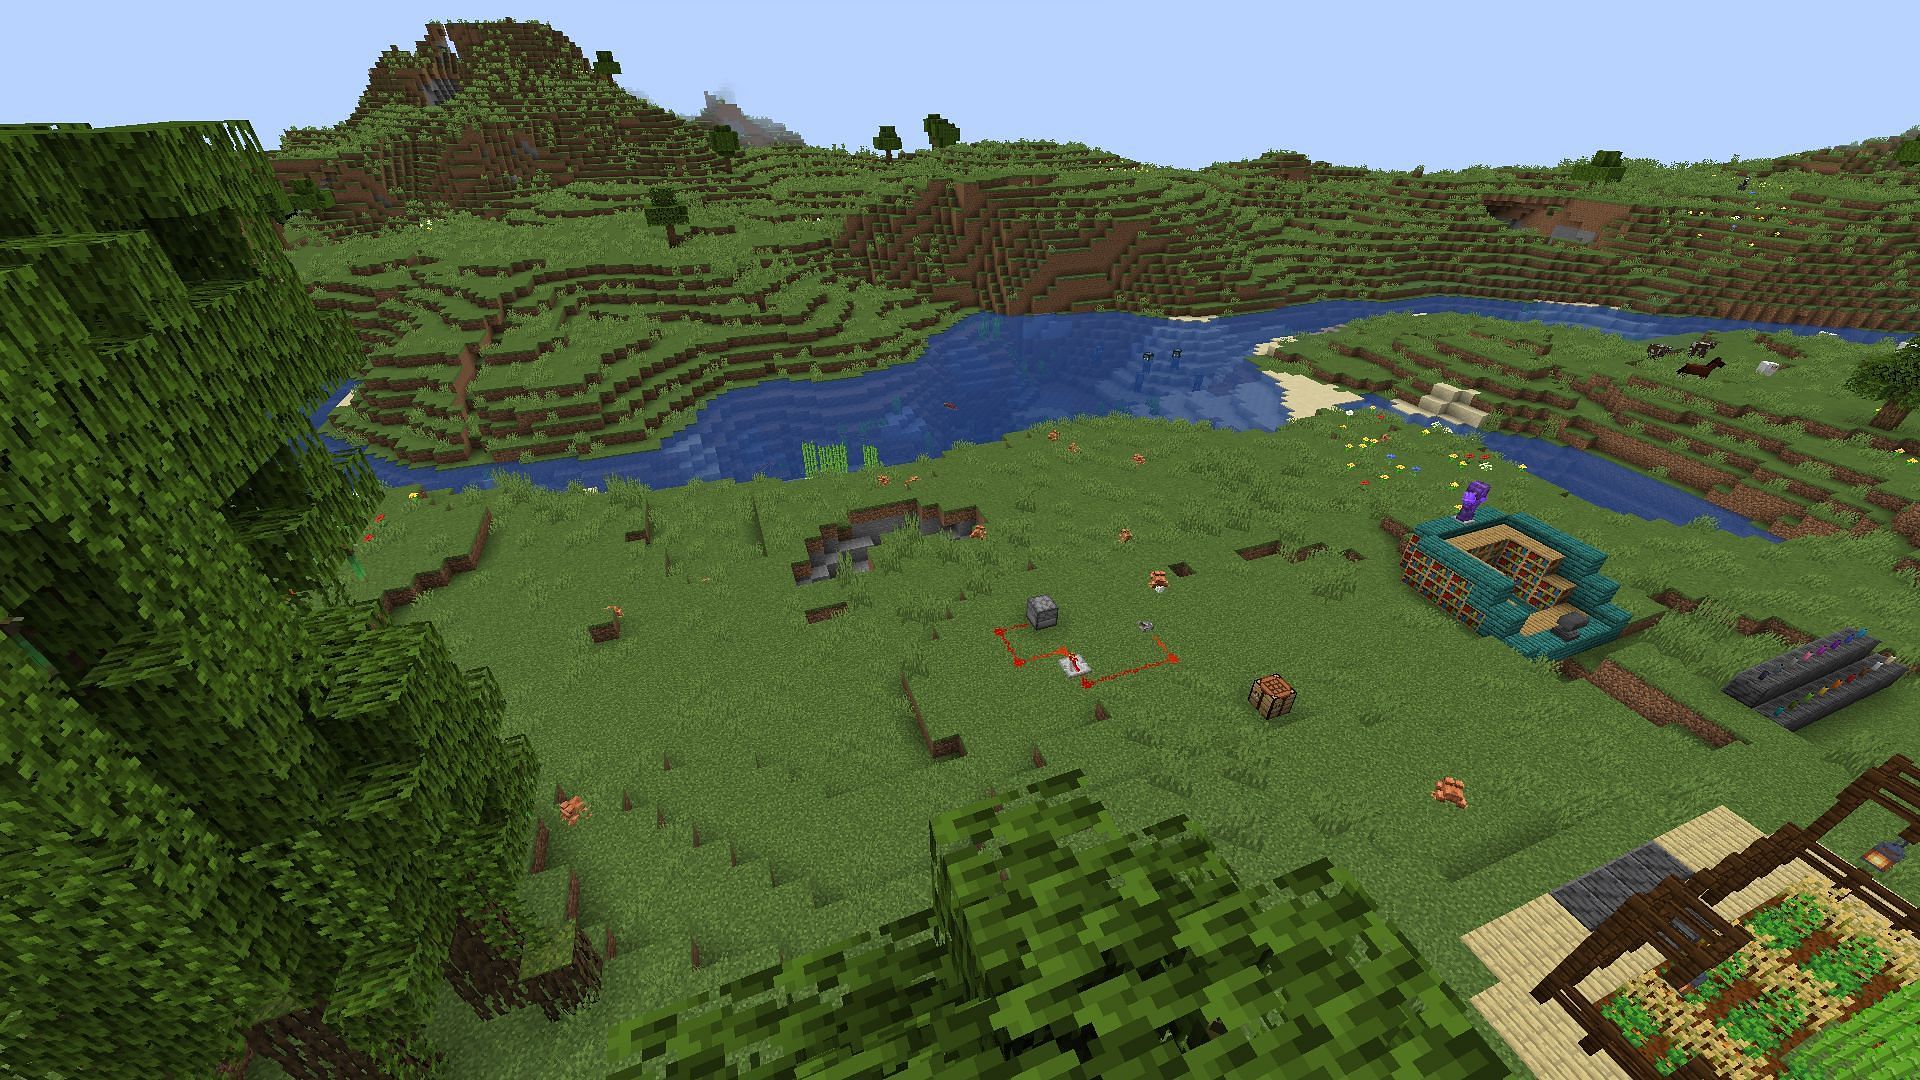 The test area with no shaders for comparison (Image via Minecraft)